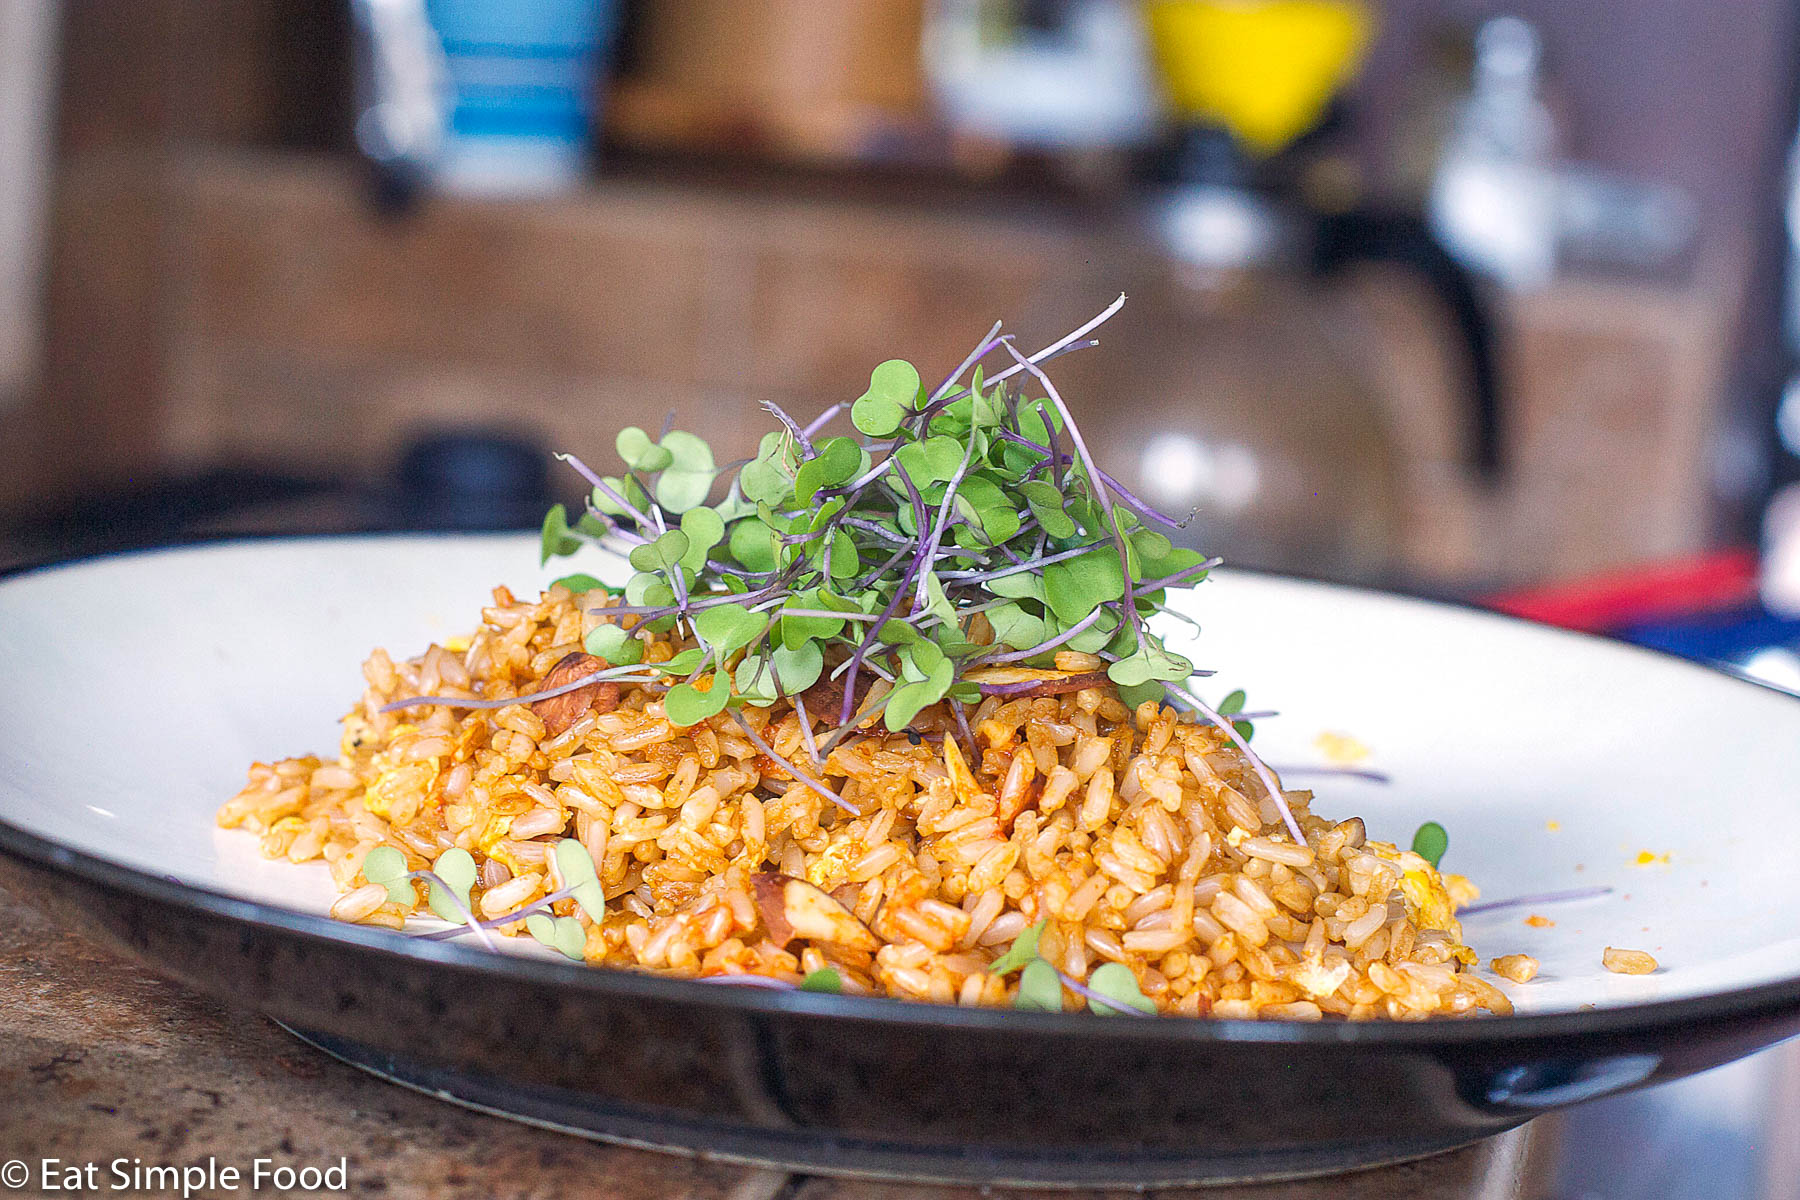 Brown Fried rice with scrambled eggs, toasted almonds, soy sauce, and fresh microgreen salad on top. White plate.